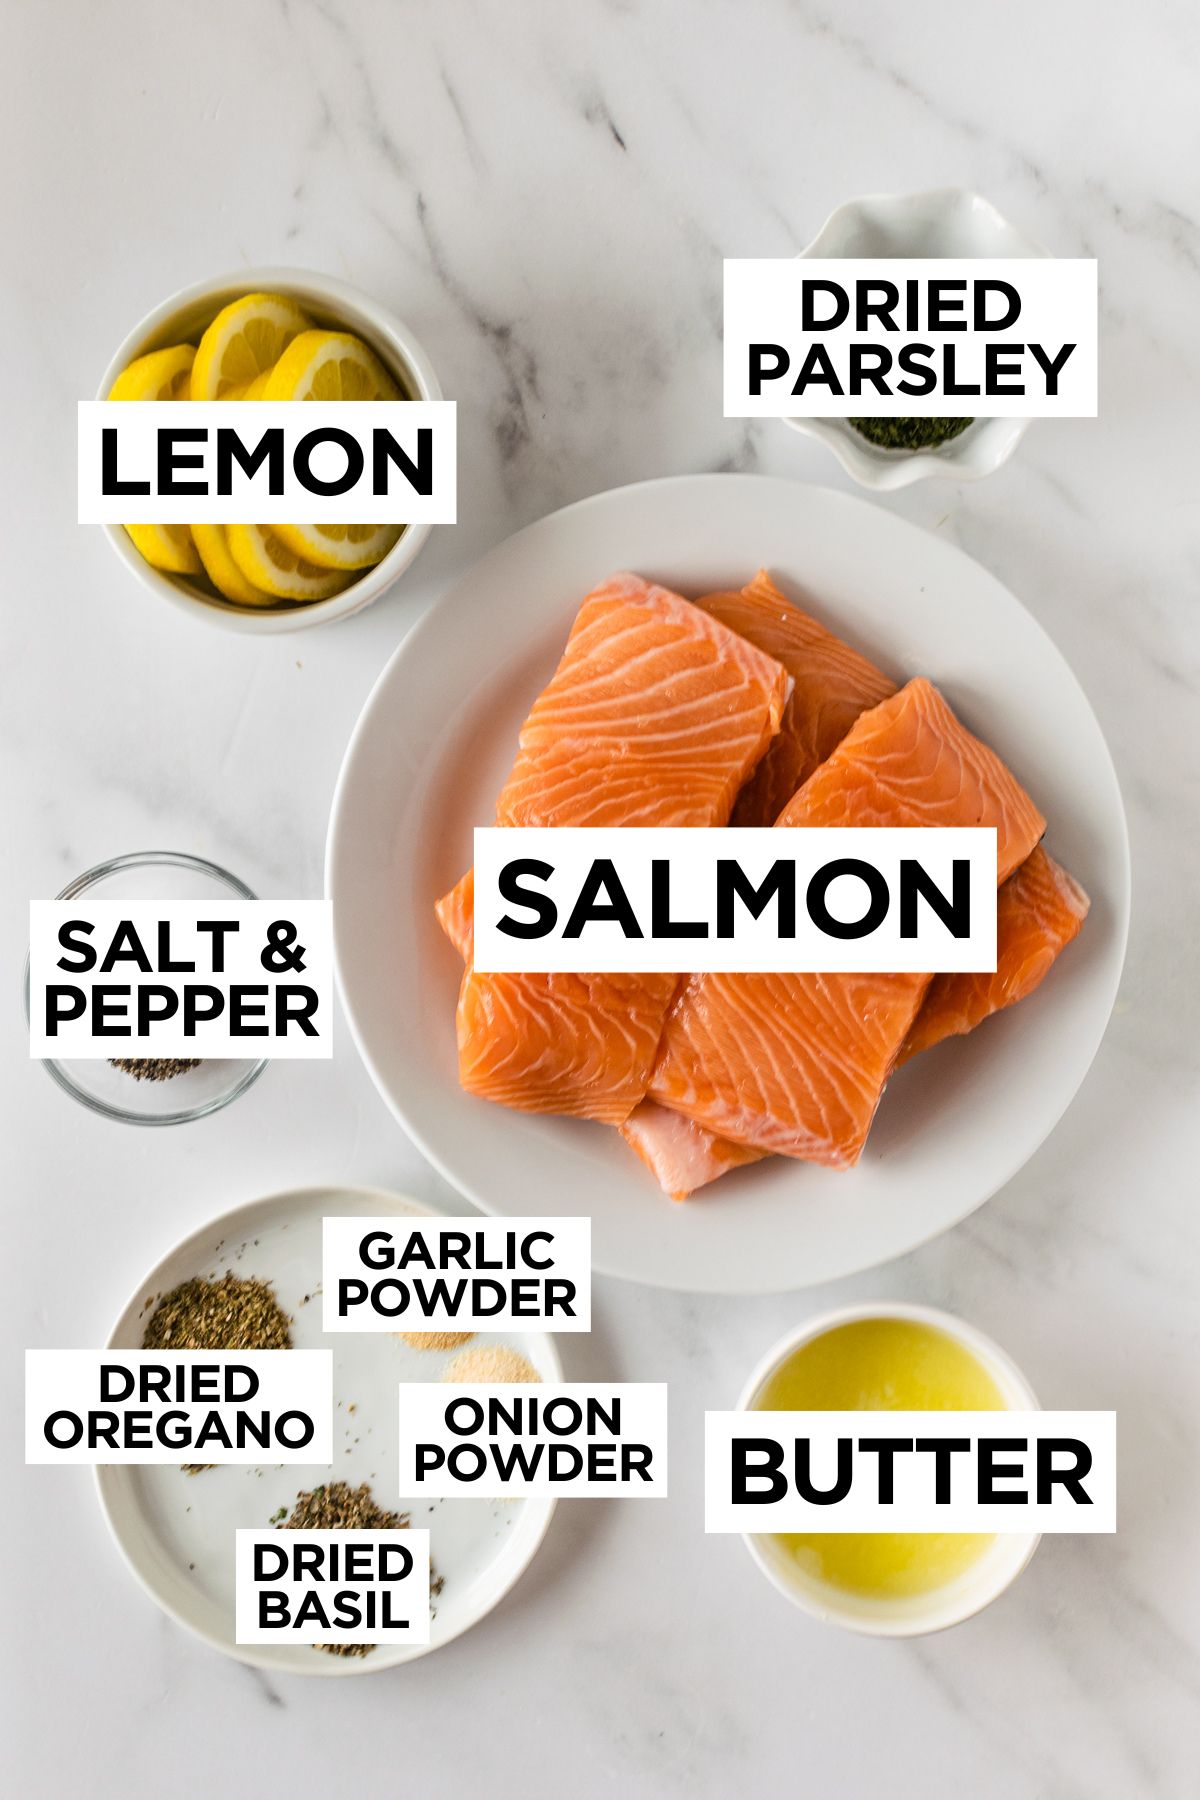 baked herb crusted salmon ingredients in bowls such as salmon, lemon, spices, and melted butter.